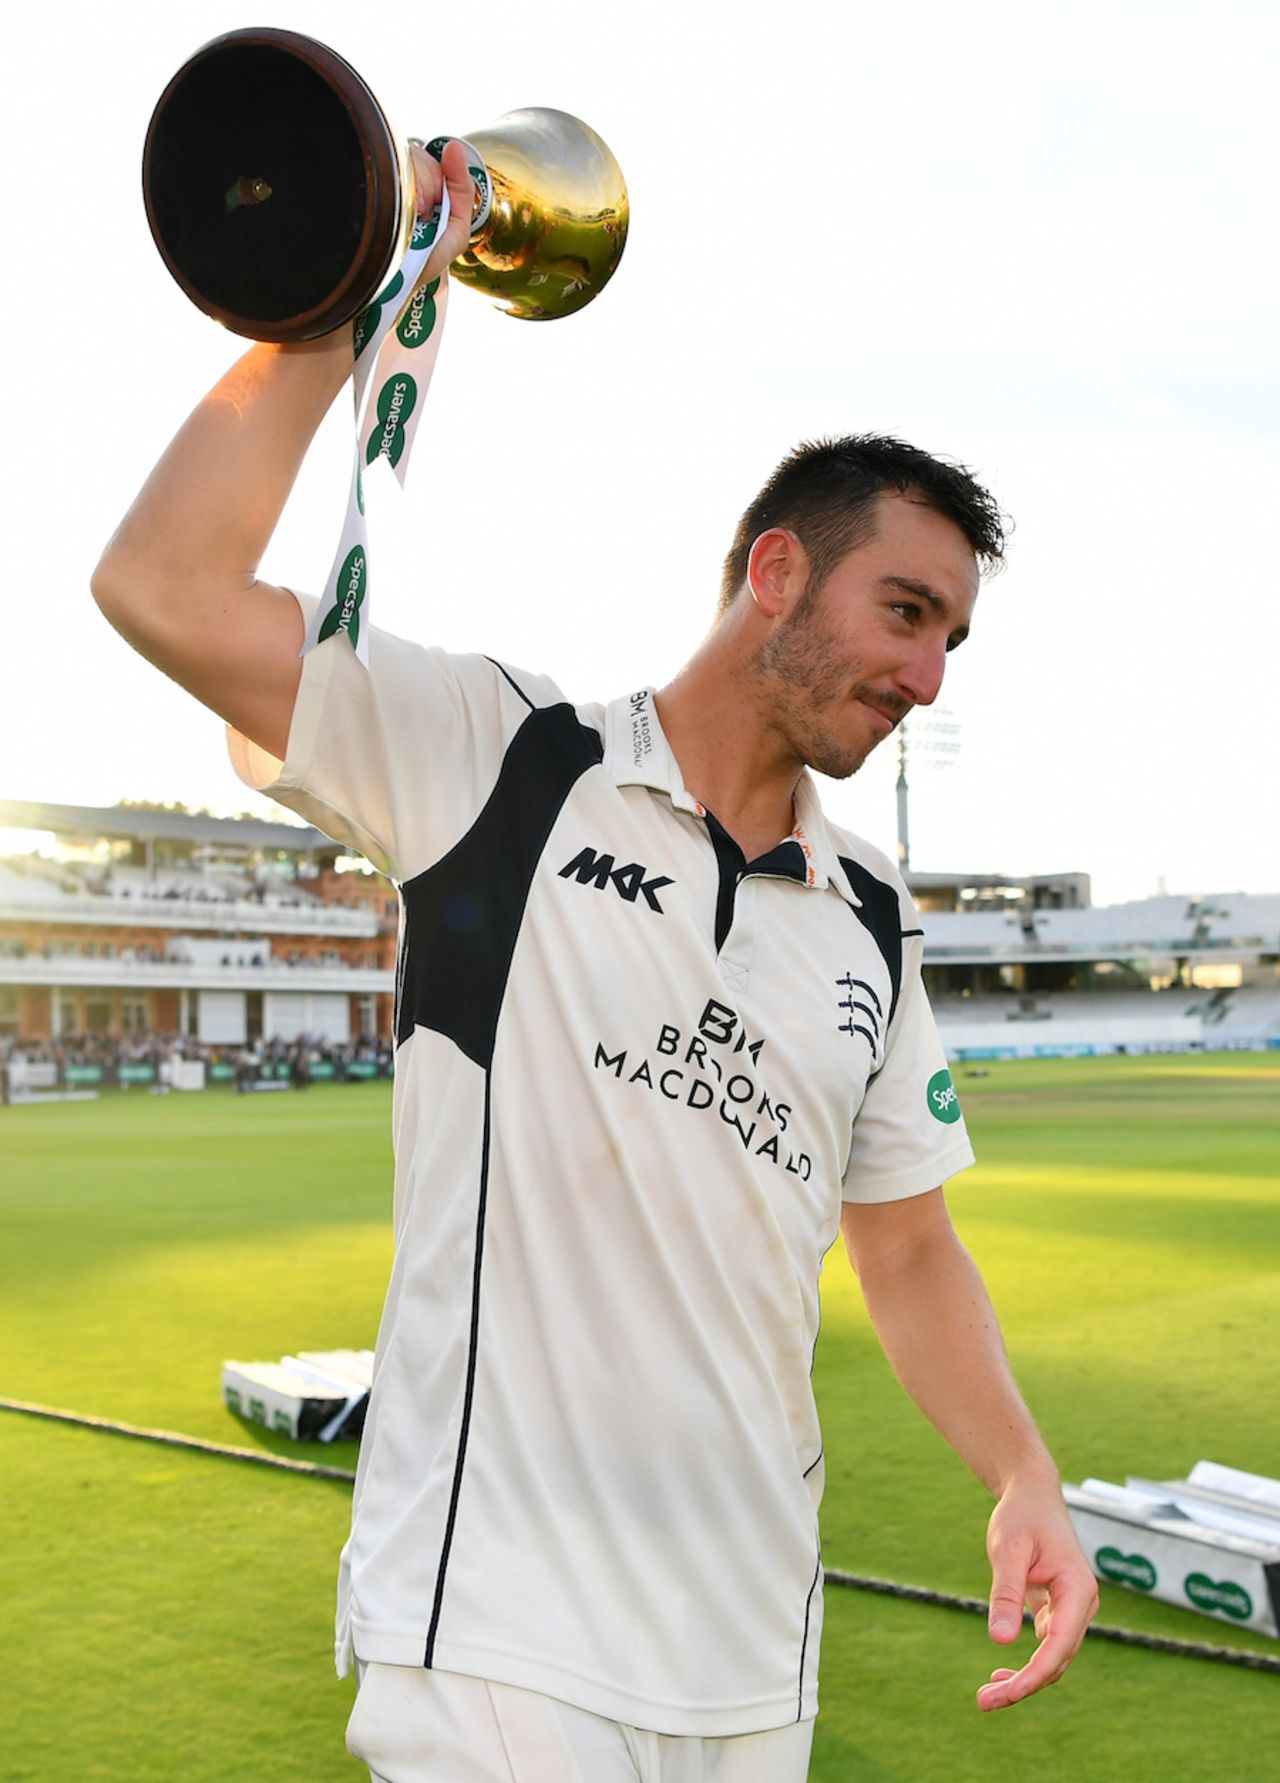 Hat-trick hero: Toby Roland-Jones with the County Championship trophy, Middlesex v Yorkshire, County Championship, Division One, Lord's, September 23, 2016